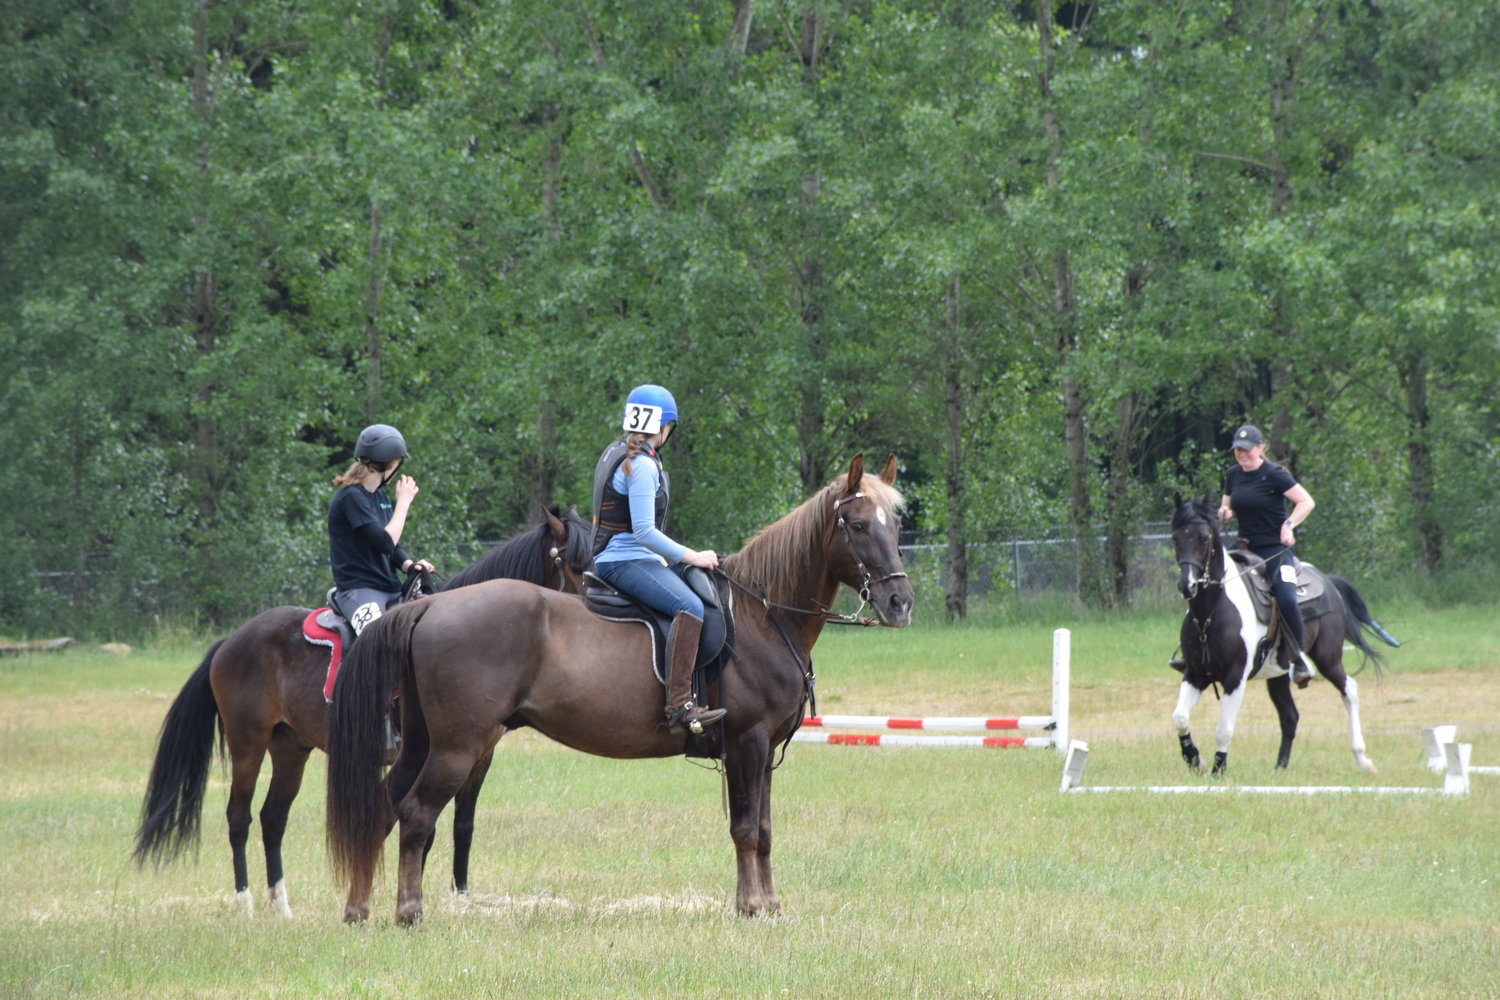 From left: Peyton Atkins, riding Tego, and Rebecca Harder, riding Mars, watch as Lori Atkins and Knight prepare for a jump on a trail riding course at the Clark County Saddle Club May 22.